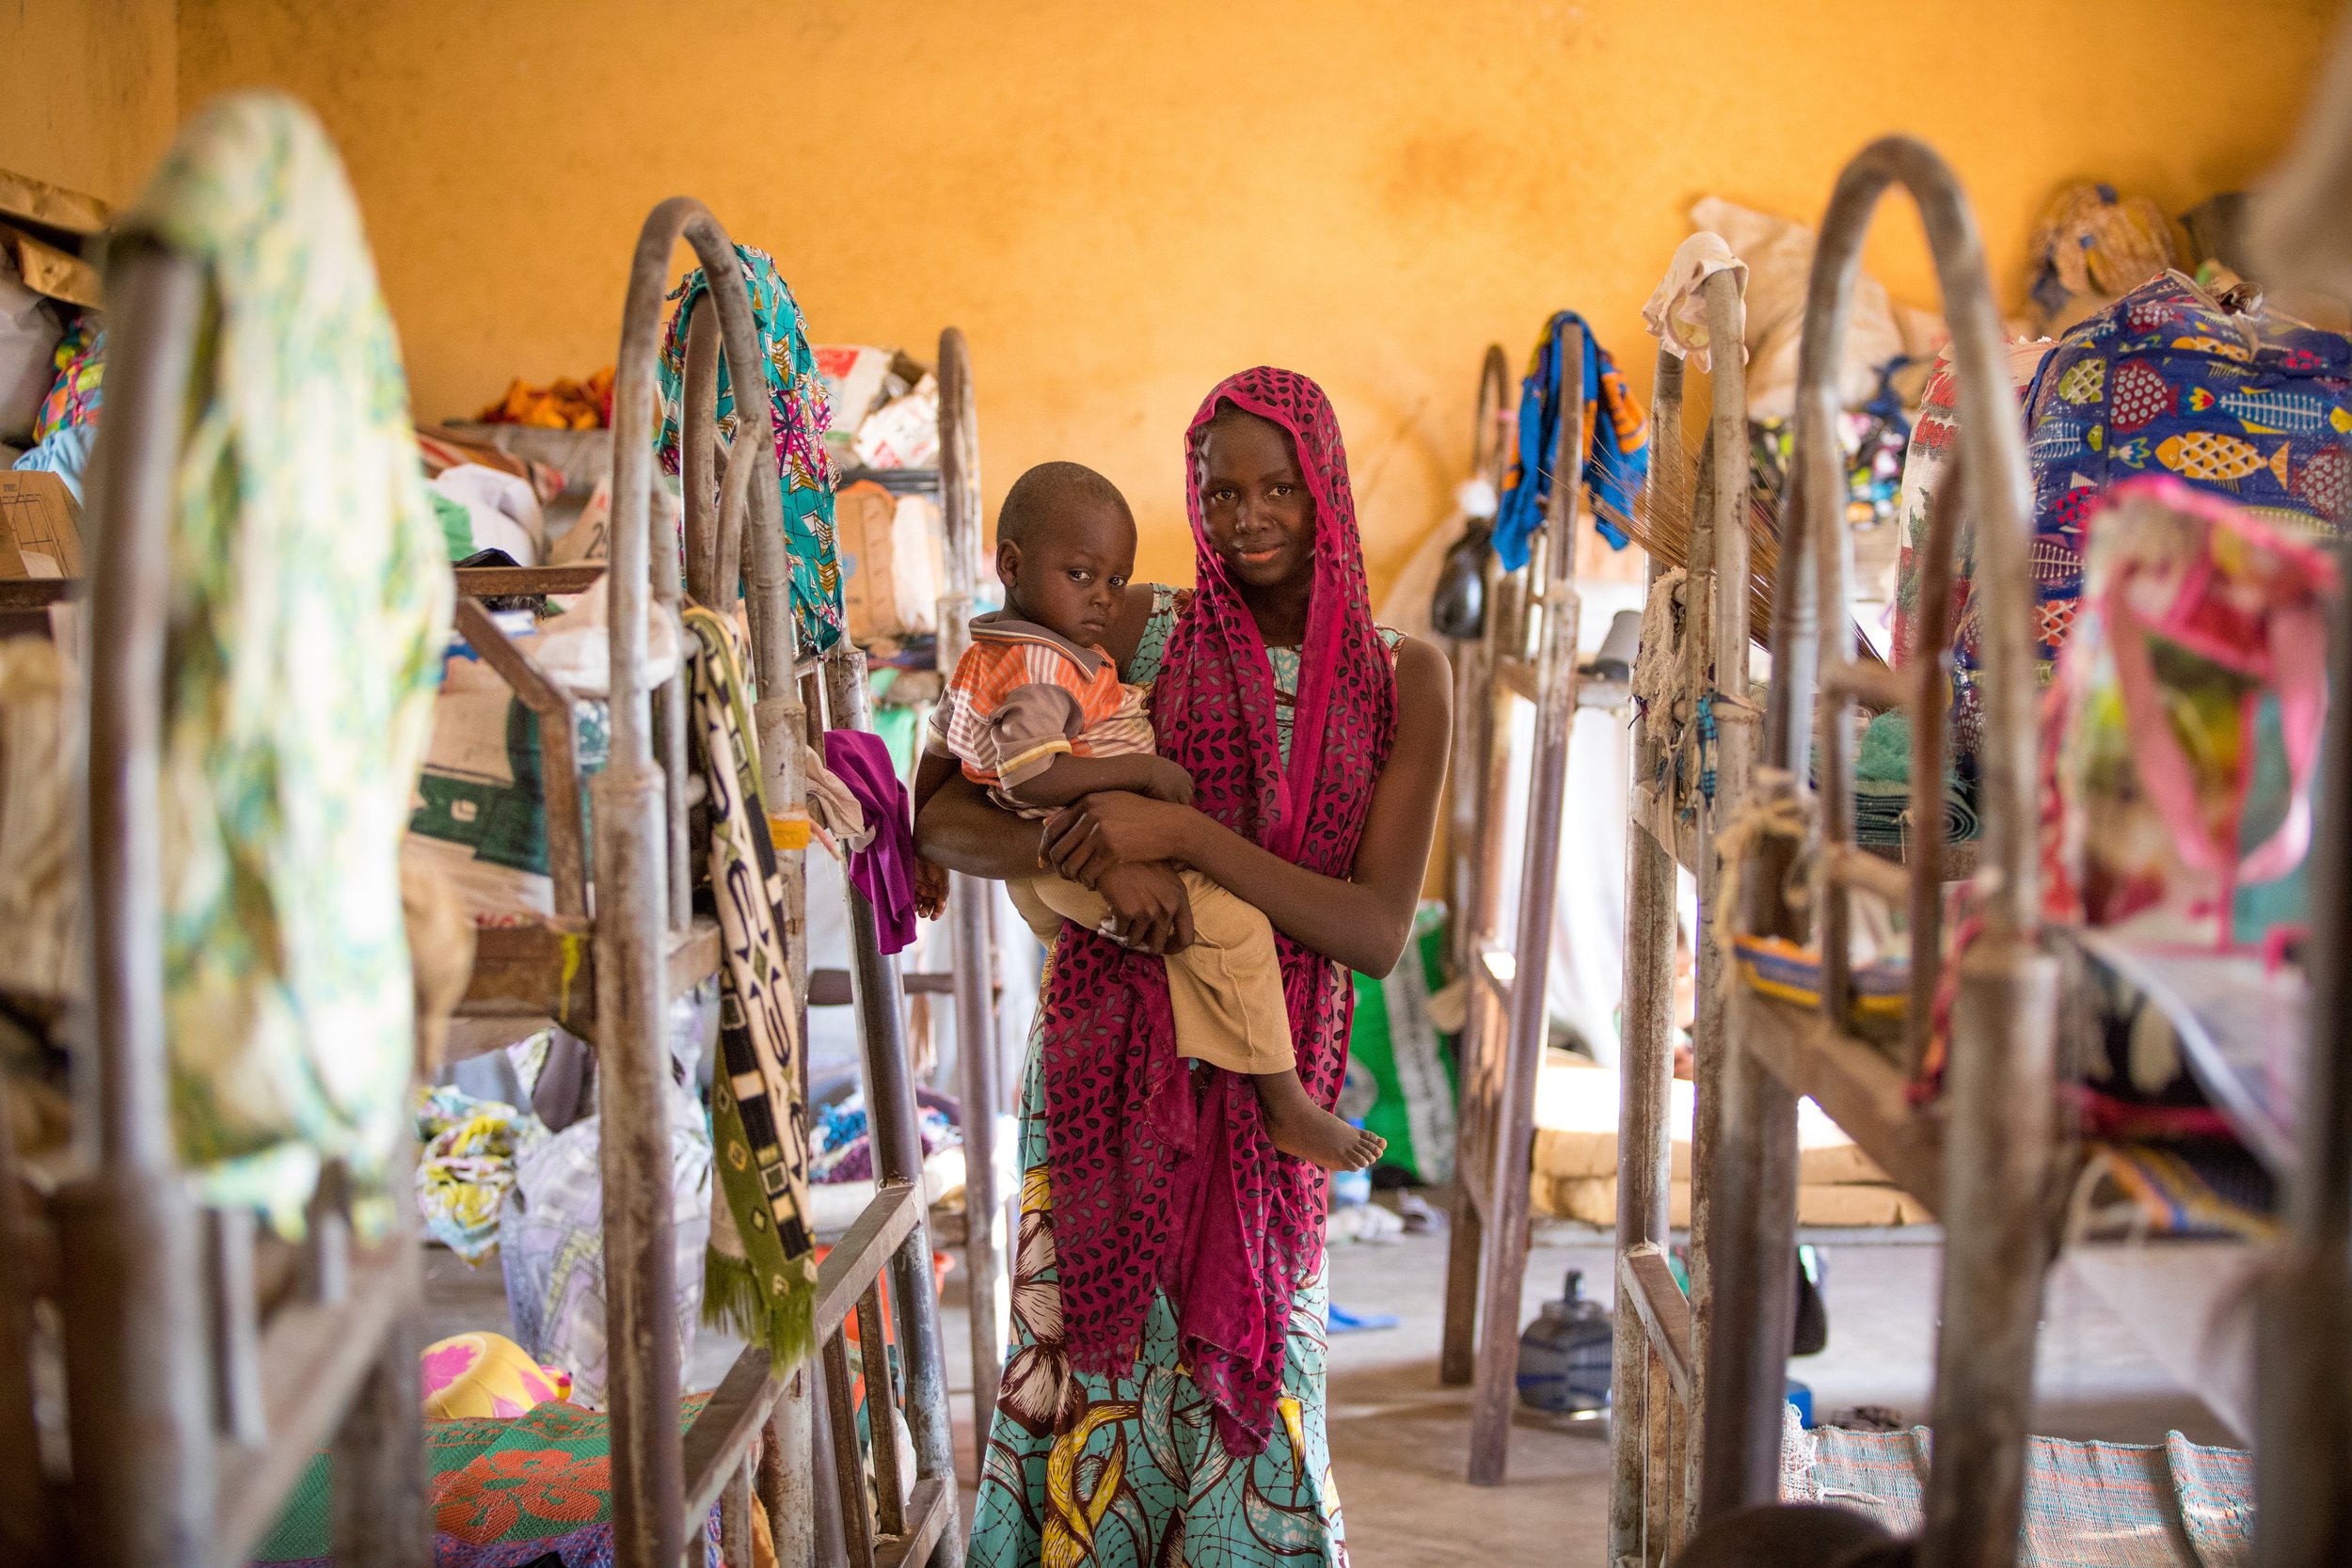 Naomi and her son live in a camp for displaced people in Yola, Nigeria